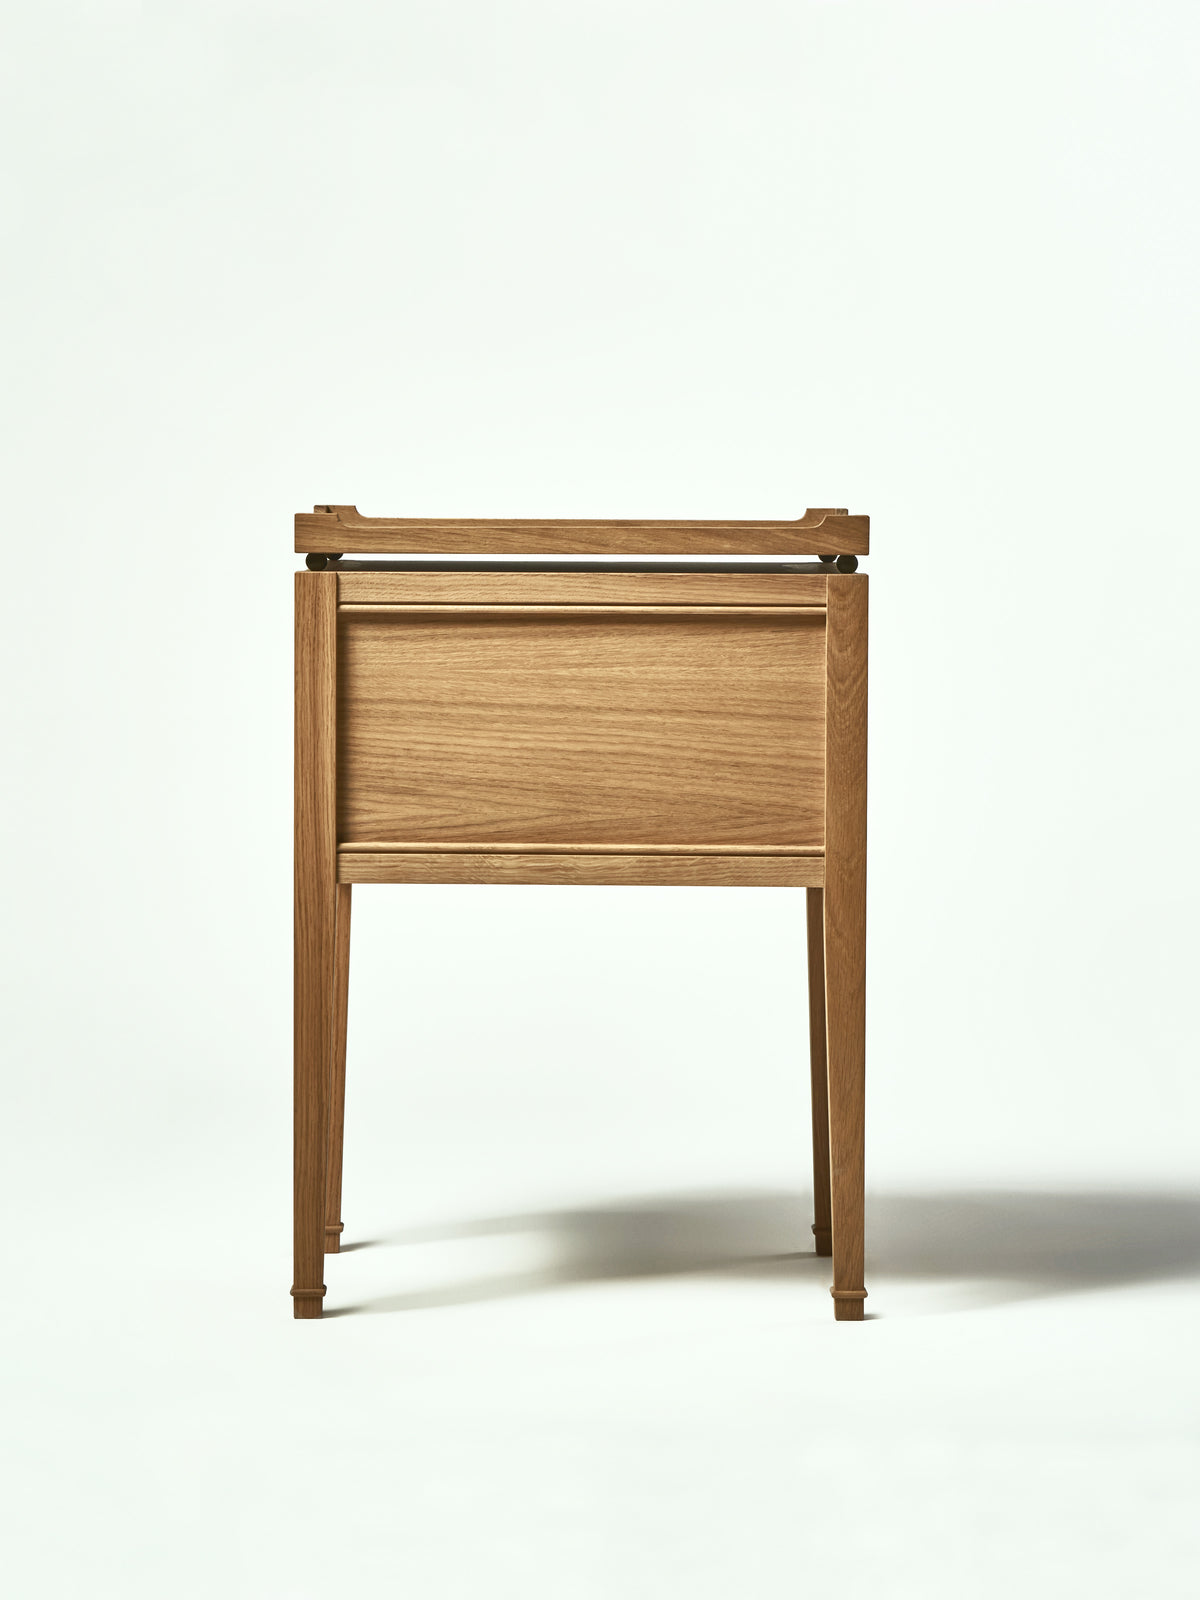 The Hanover Bedside Table